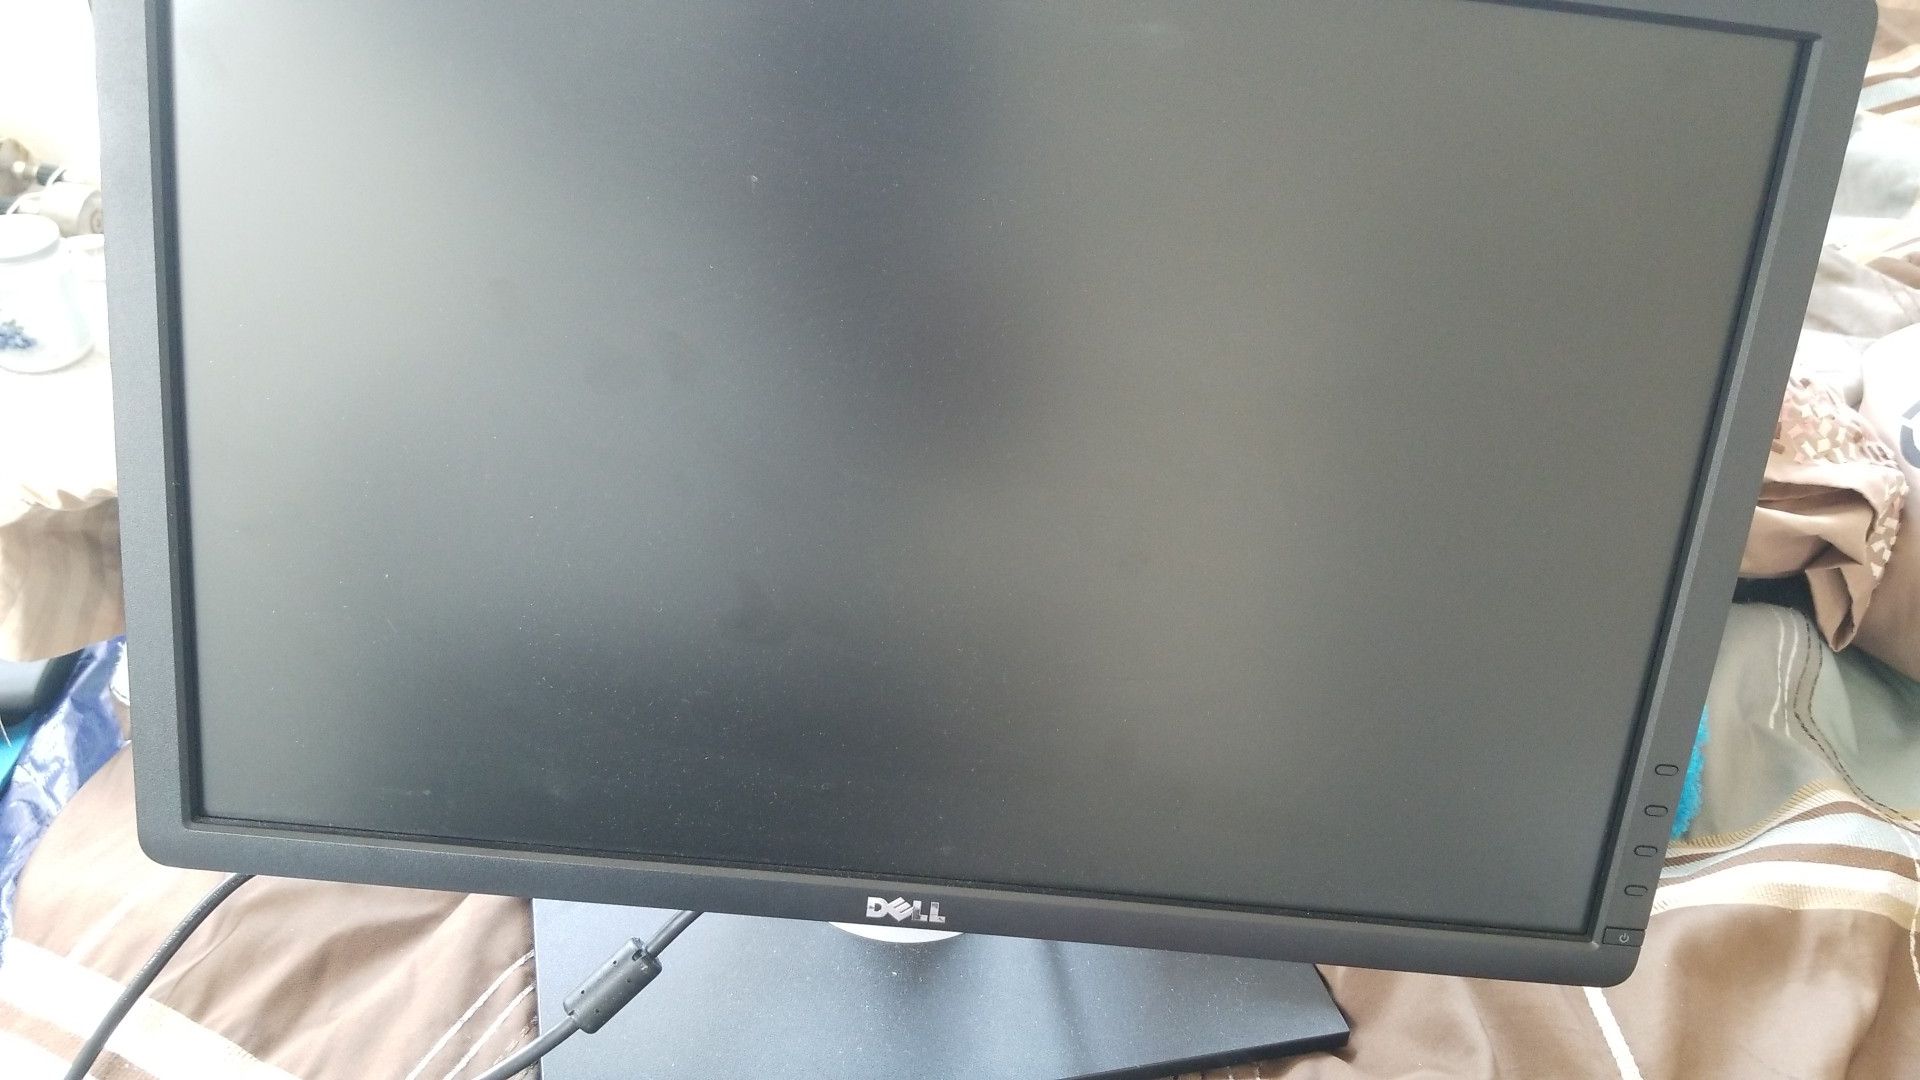 Dell Monitor 20" works really well, comes with wires